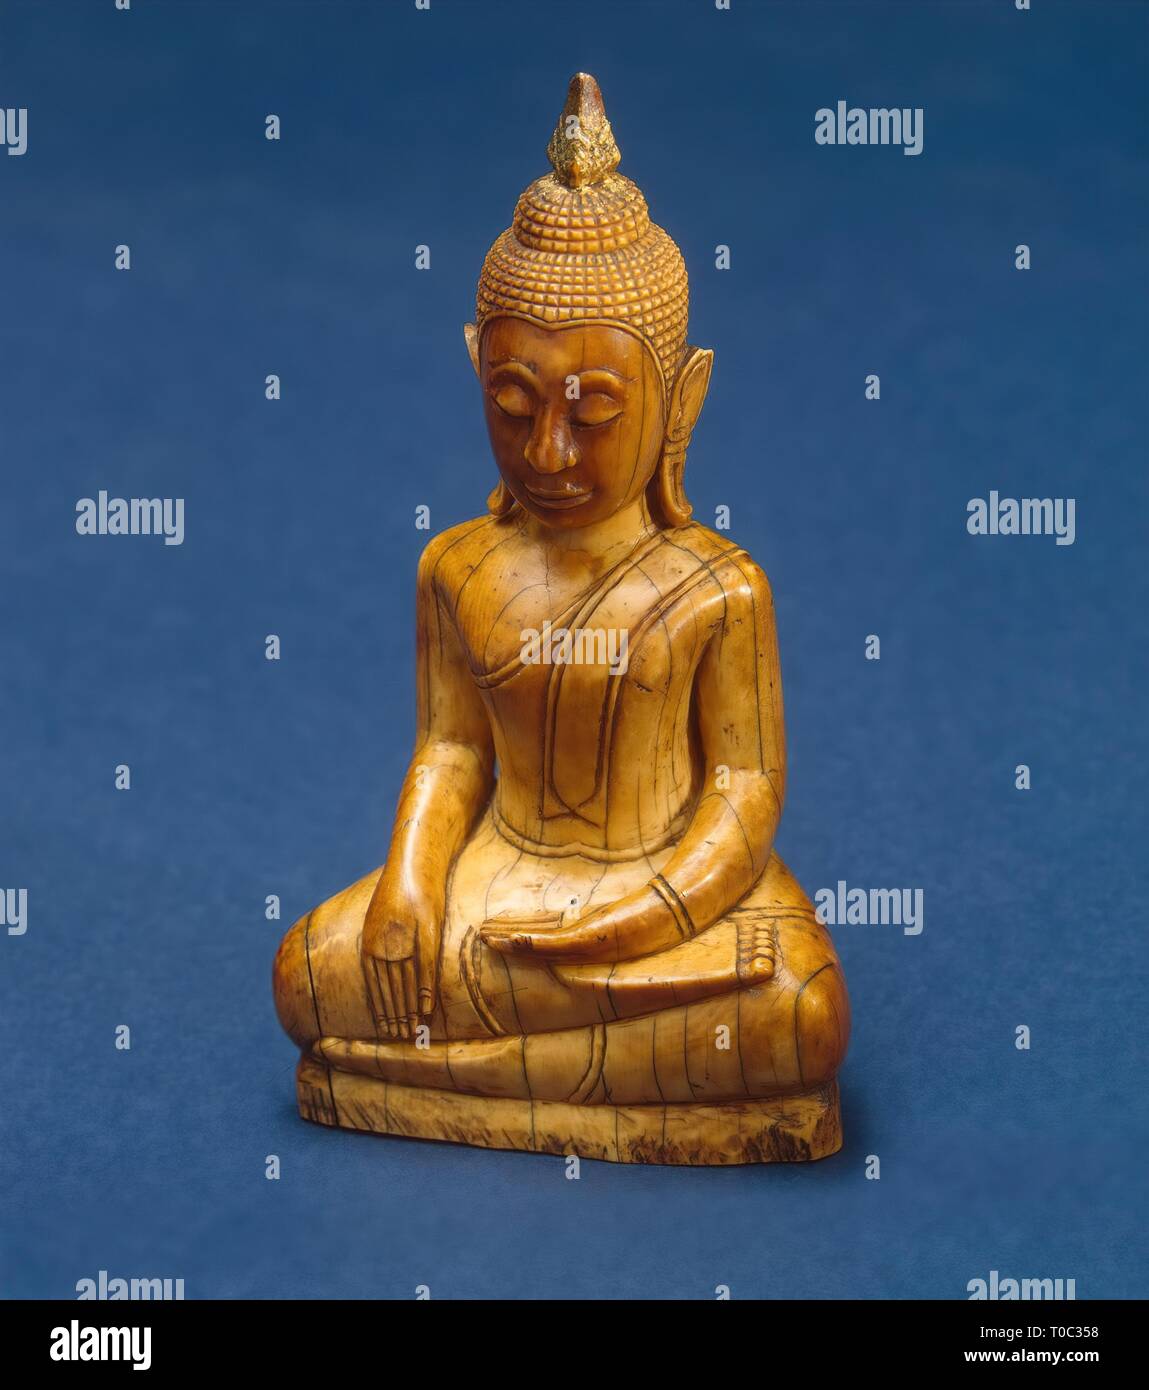 'Buddha Maravijaya (Buddha Calling the Earth to Witness)'. Siam (now Thailand). Bangkok art, Late 18th - early of the 19th century. Dimensions: h. 12 cm. Museum: State Hermitage, St. Petersburg. Stock Photo